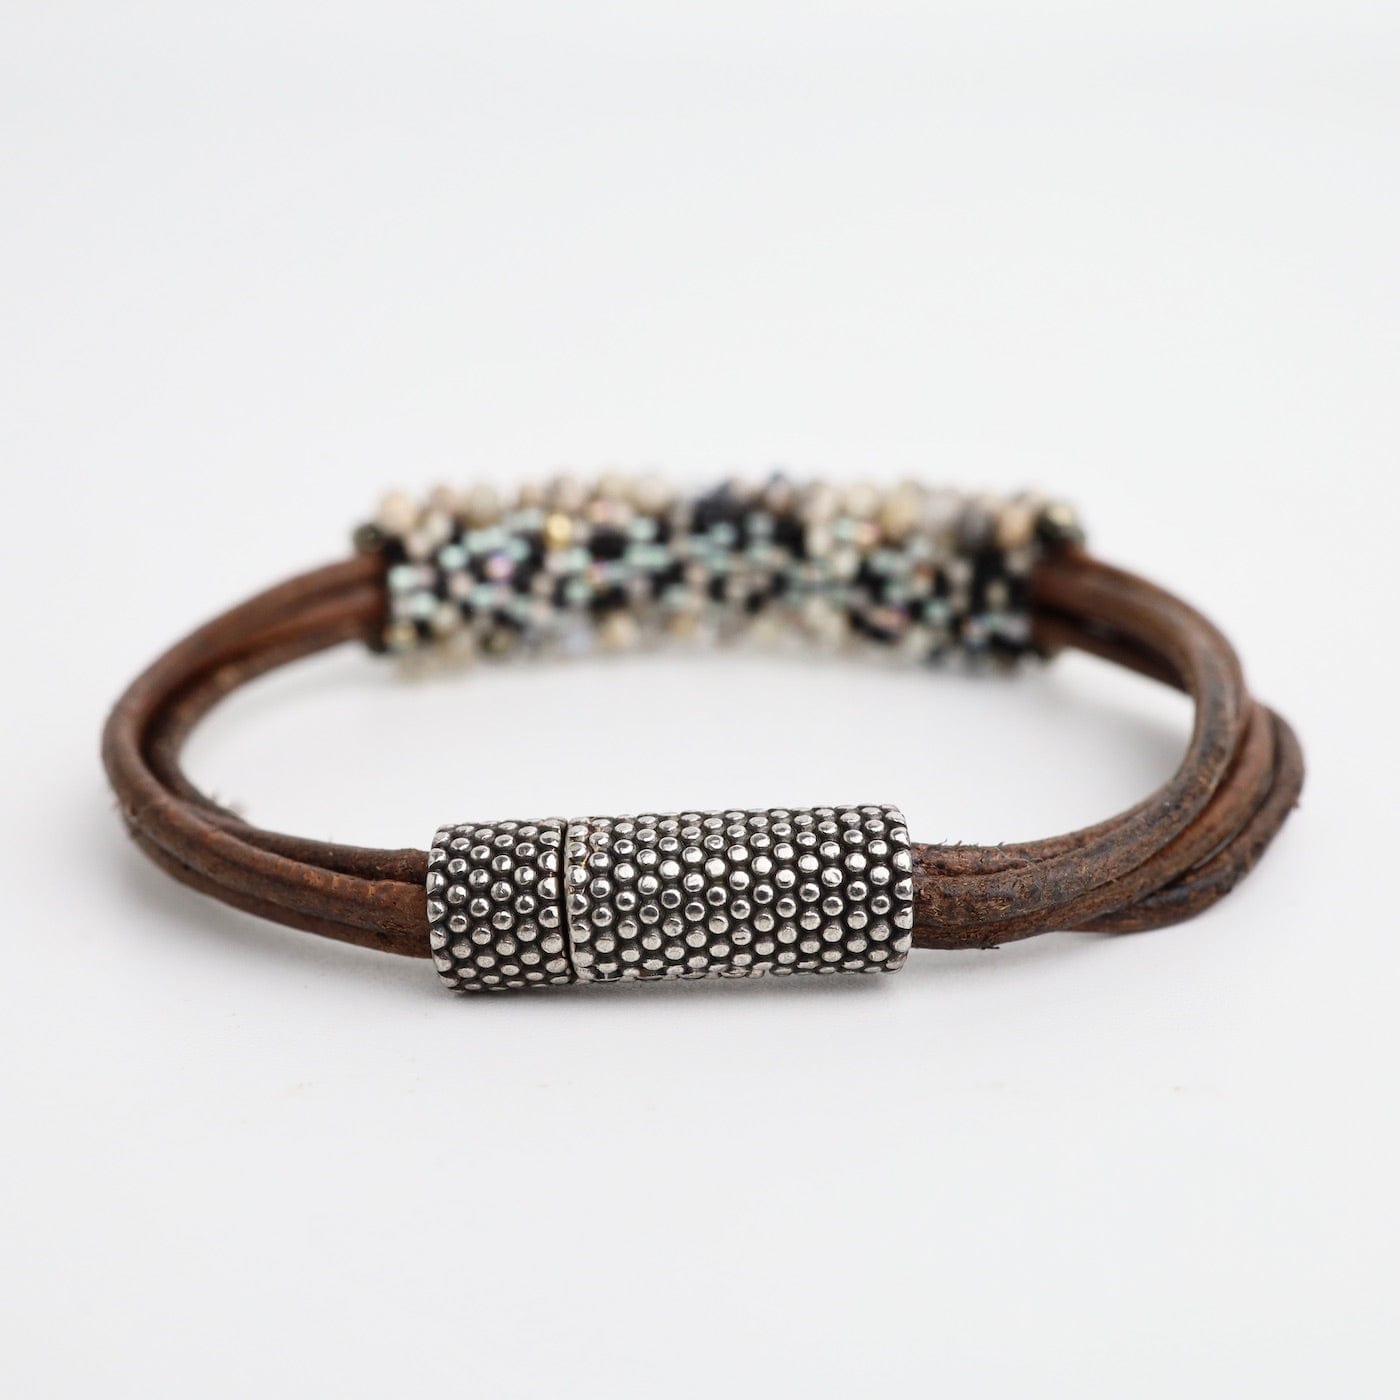 BRC-JM Hand Stitched Russian Opal & Pyrite and Multi Strand Grey Leather Bracelet